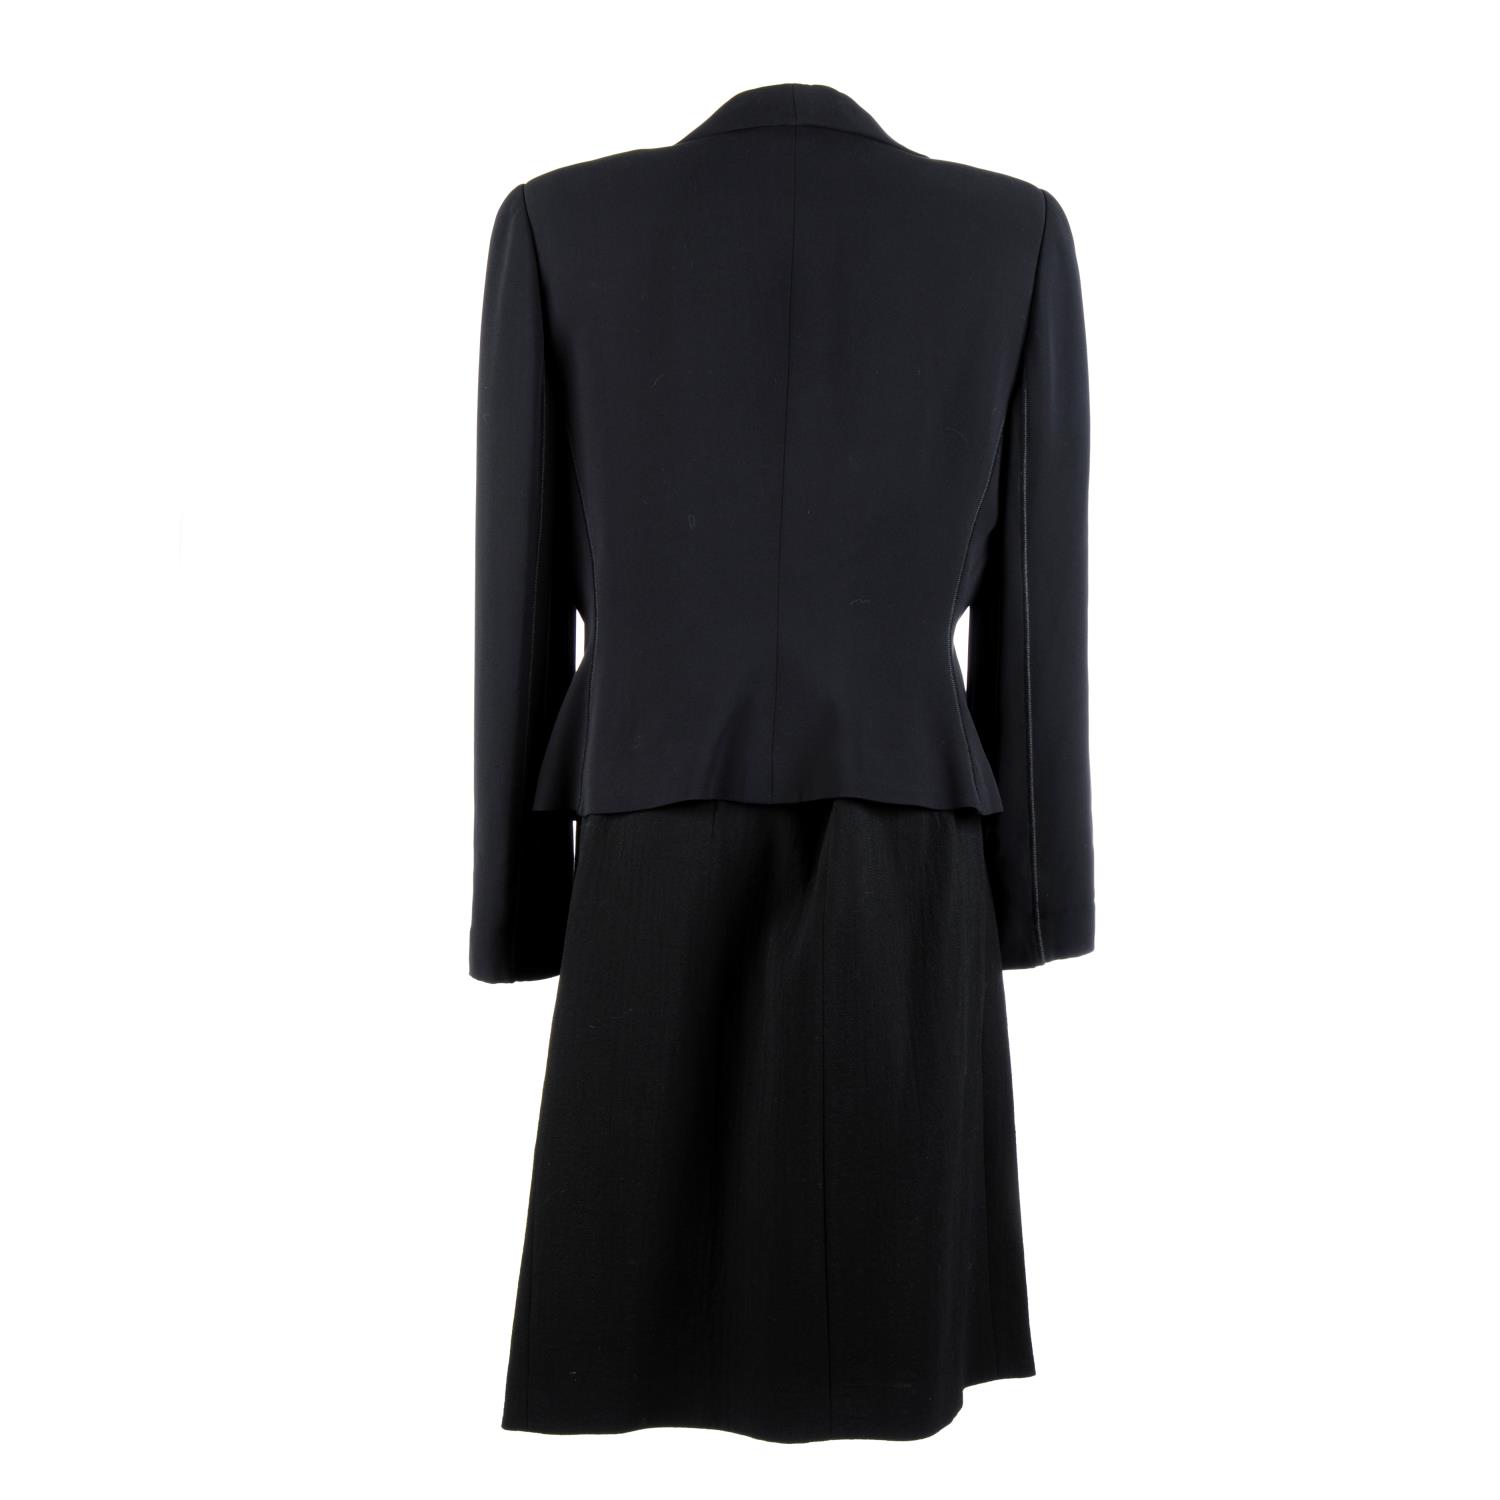 ARMANI COLLEZIONI - a jacket and pencil skirt. - Image 2 of 3